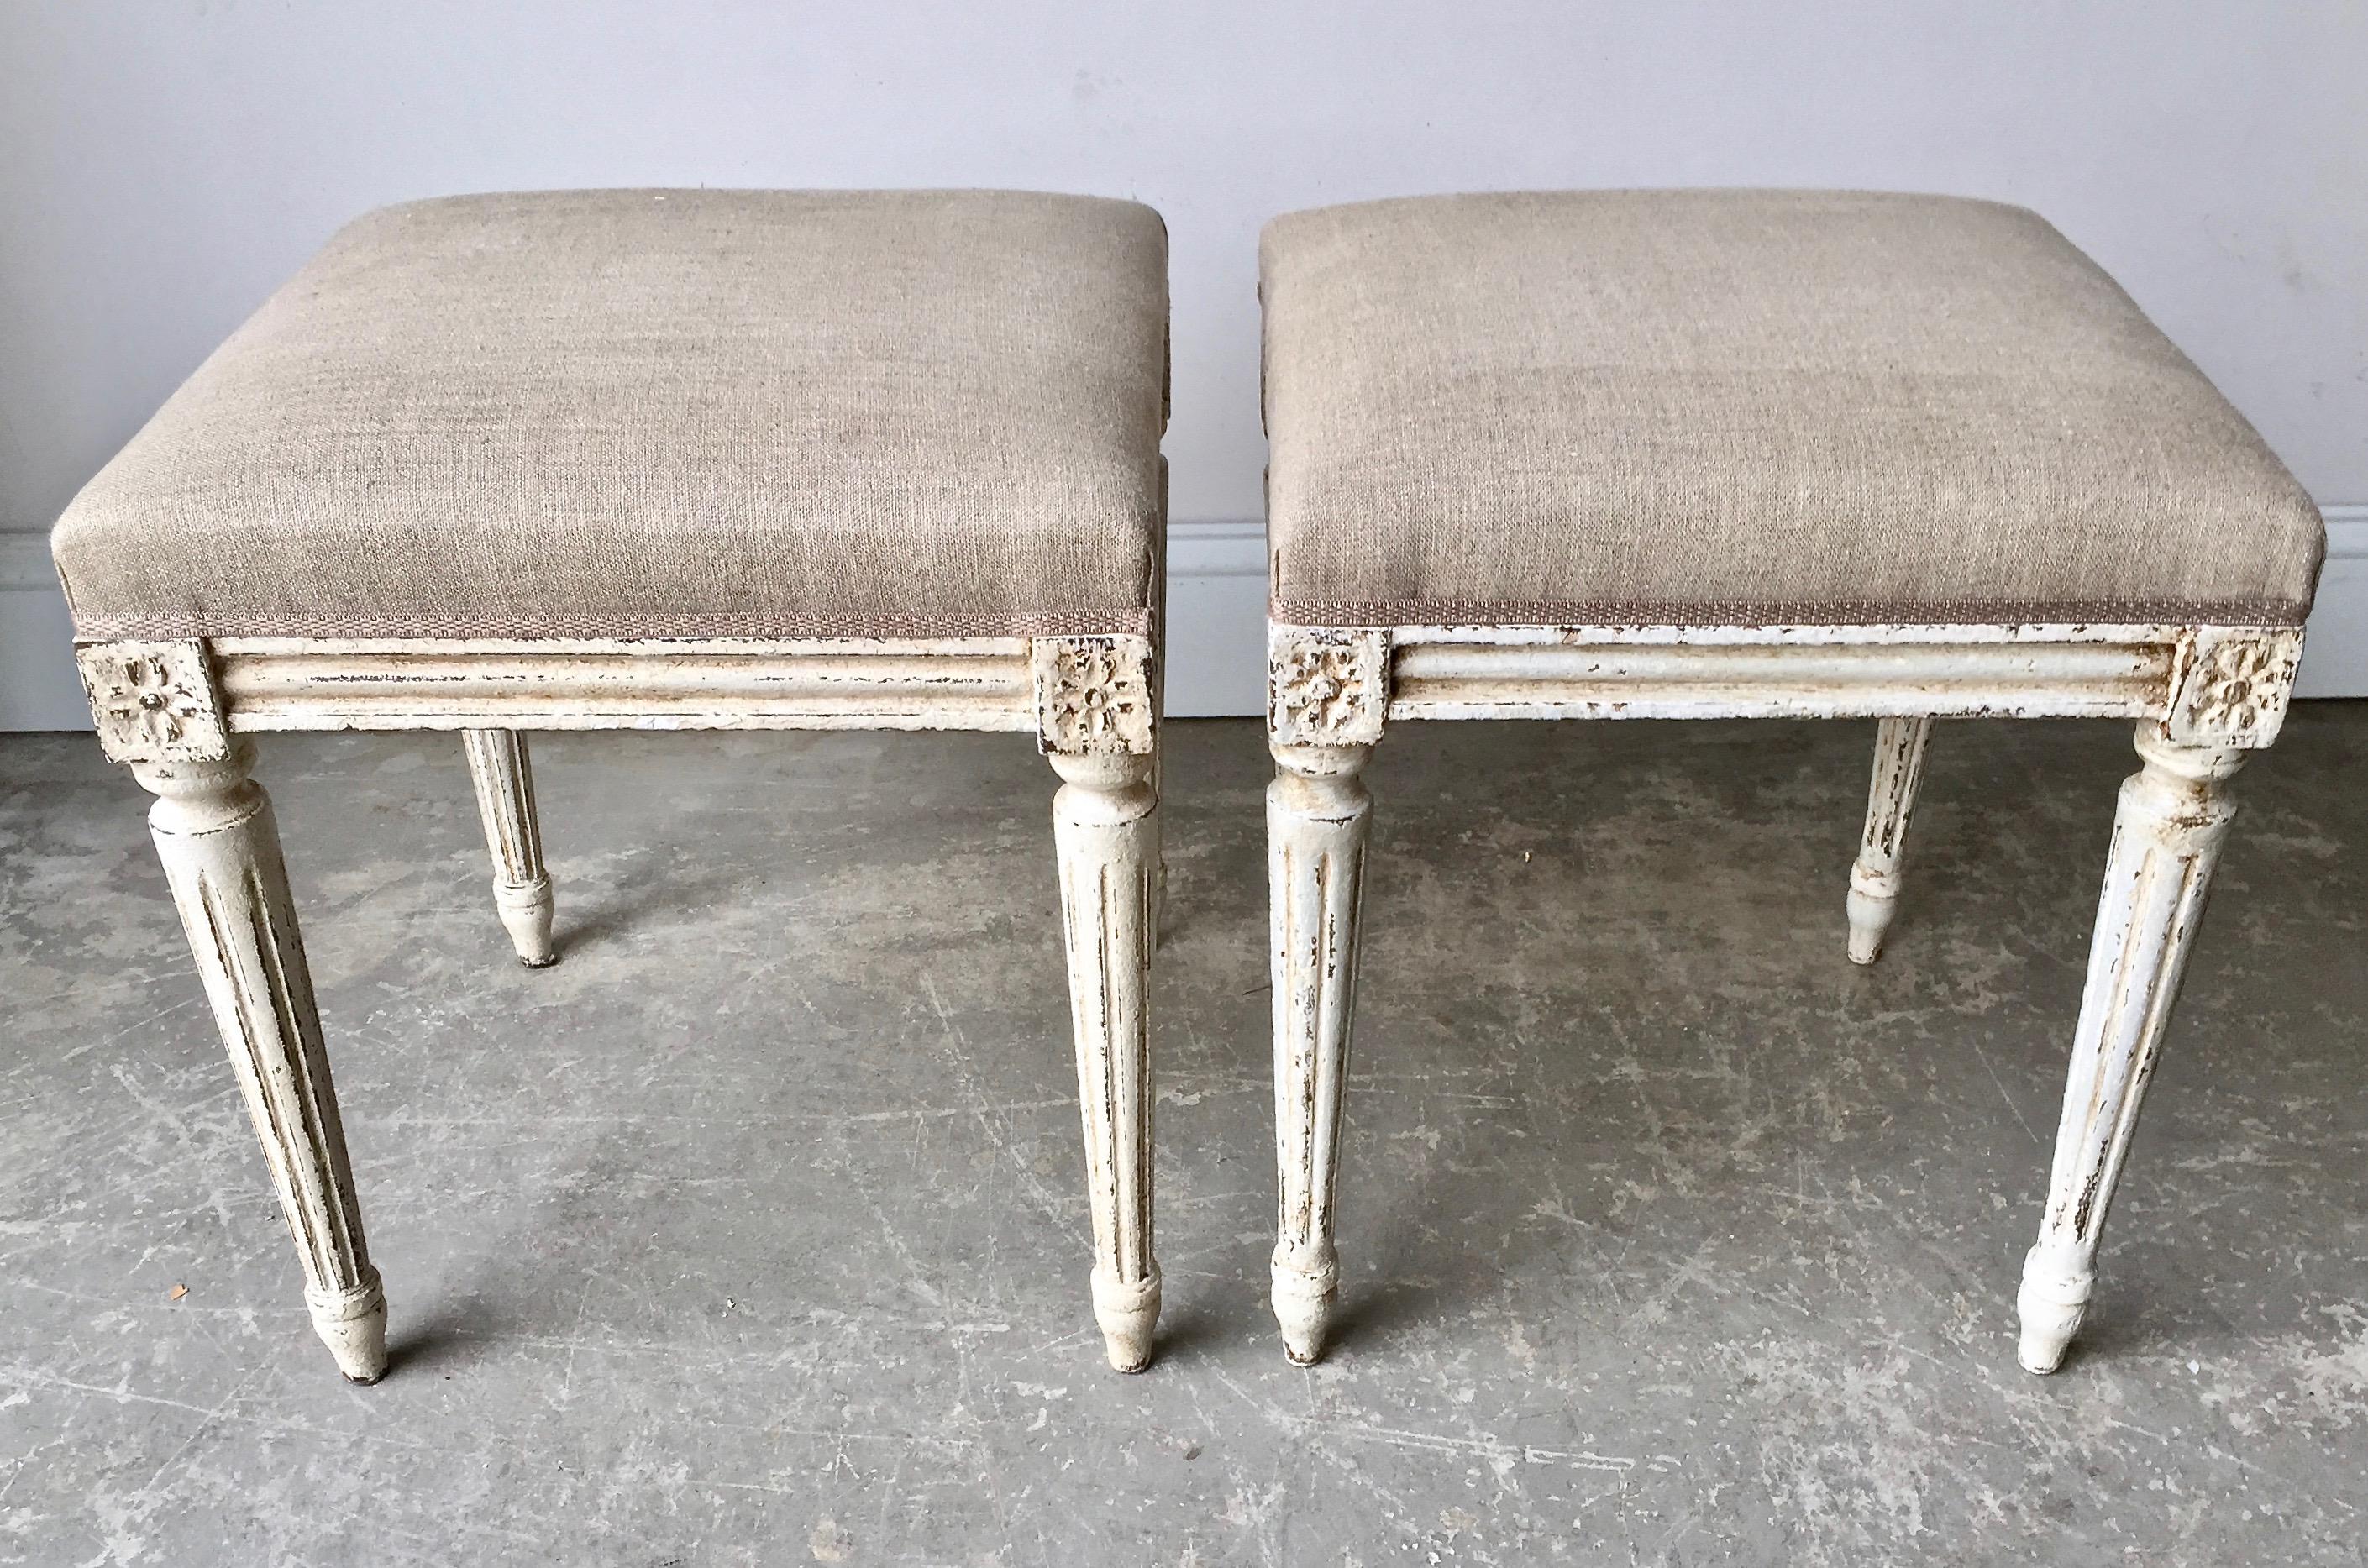 A charming pair of square in shape, Louis XVI style stool with legs tapered flutings and joining dies decorated with a classical daisy motifs. Upholstered in linen fabric, France, circa 1900
Here are few examples. Surprising pieces and objects,